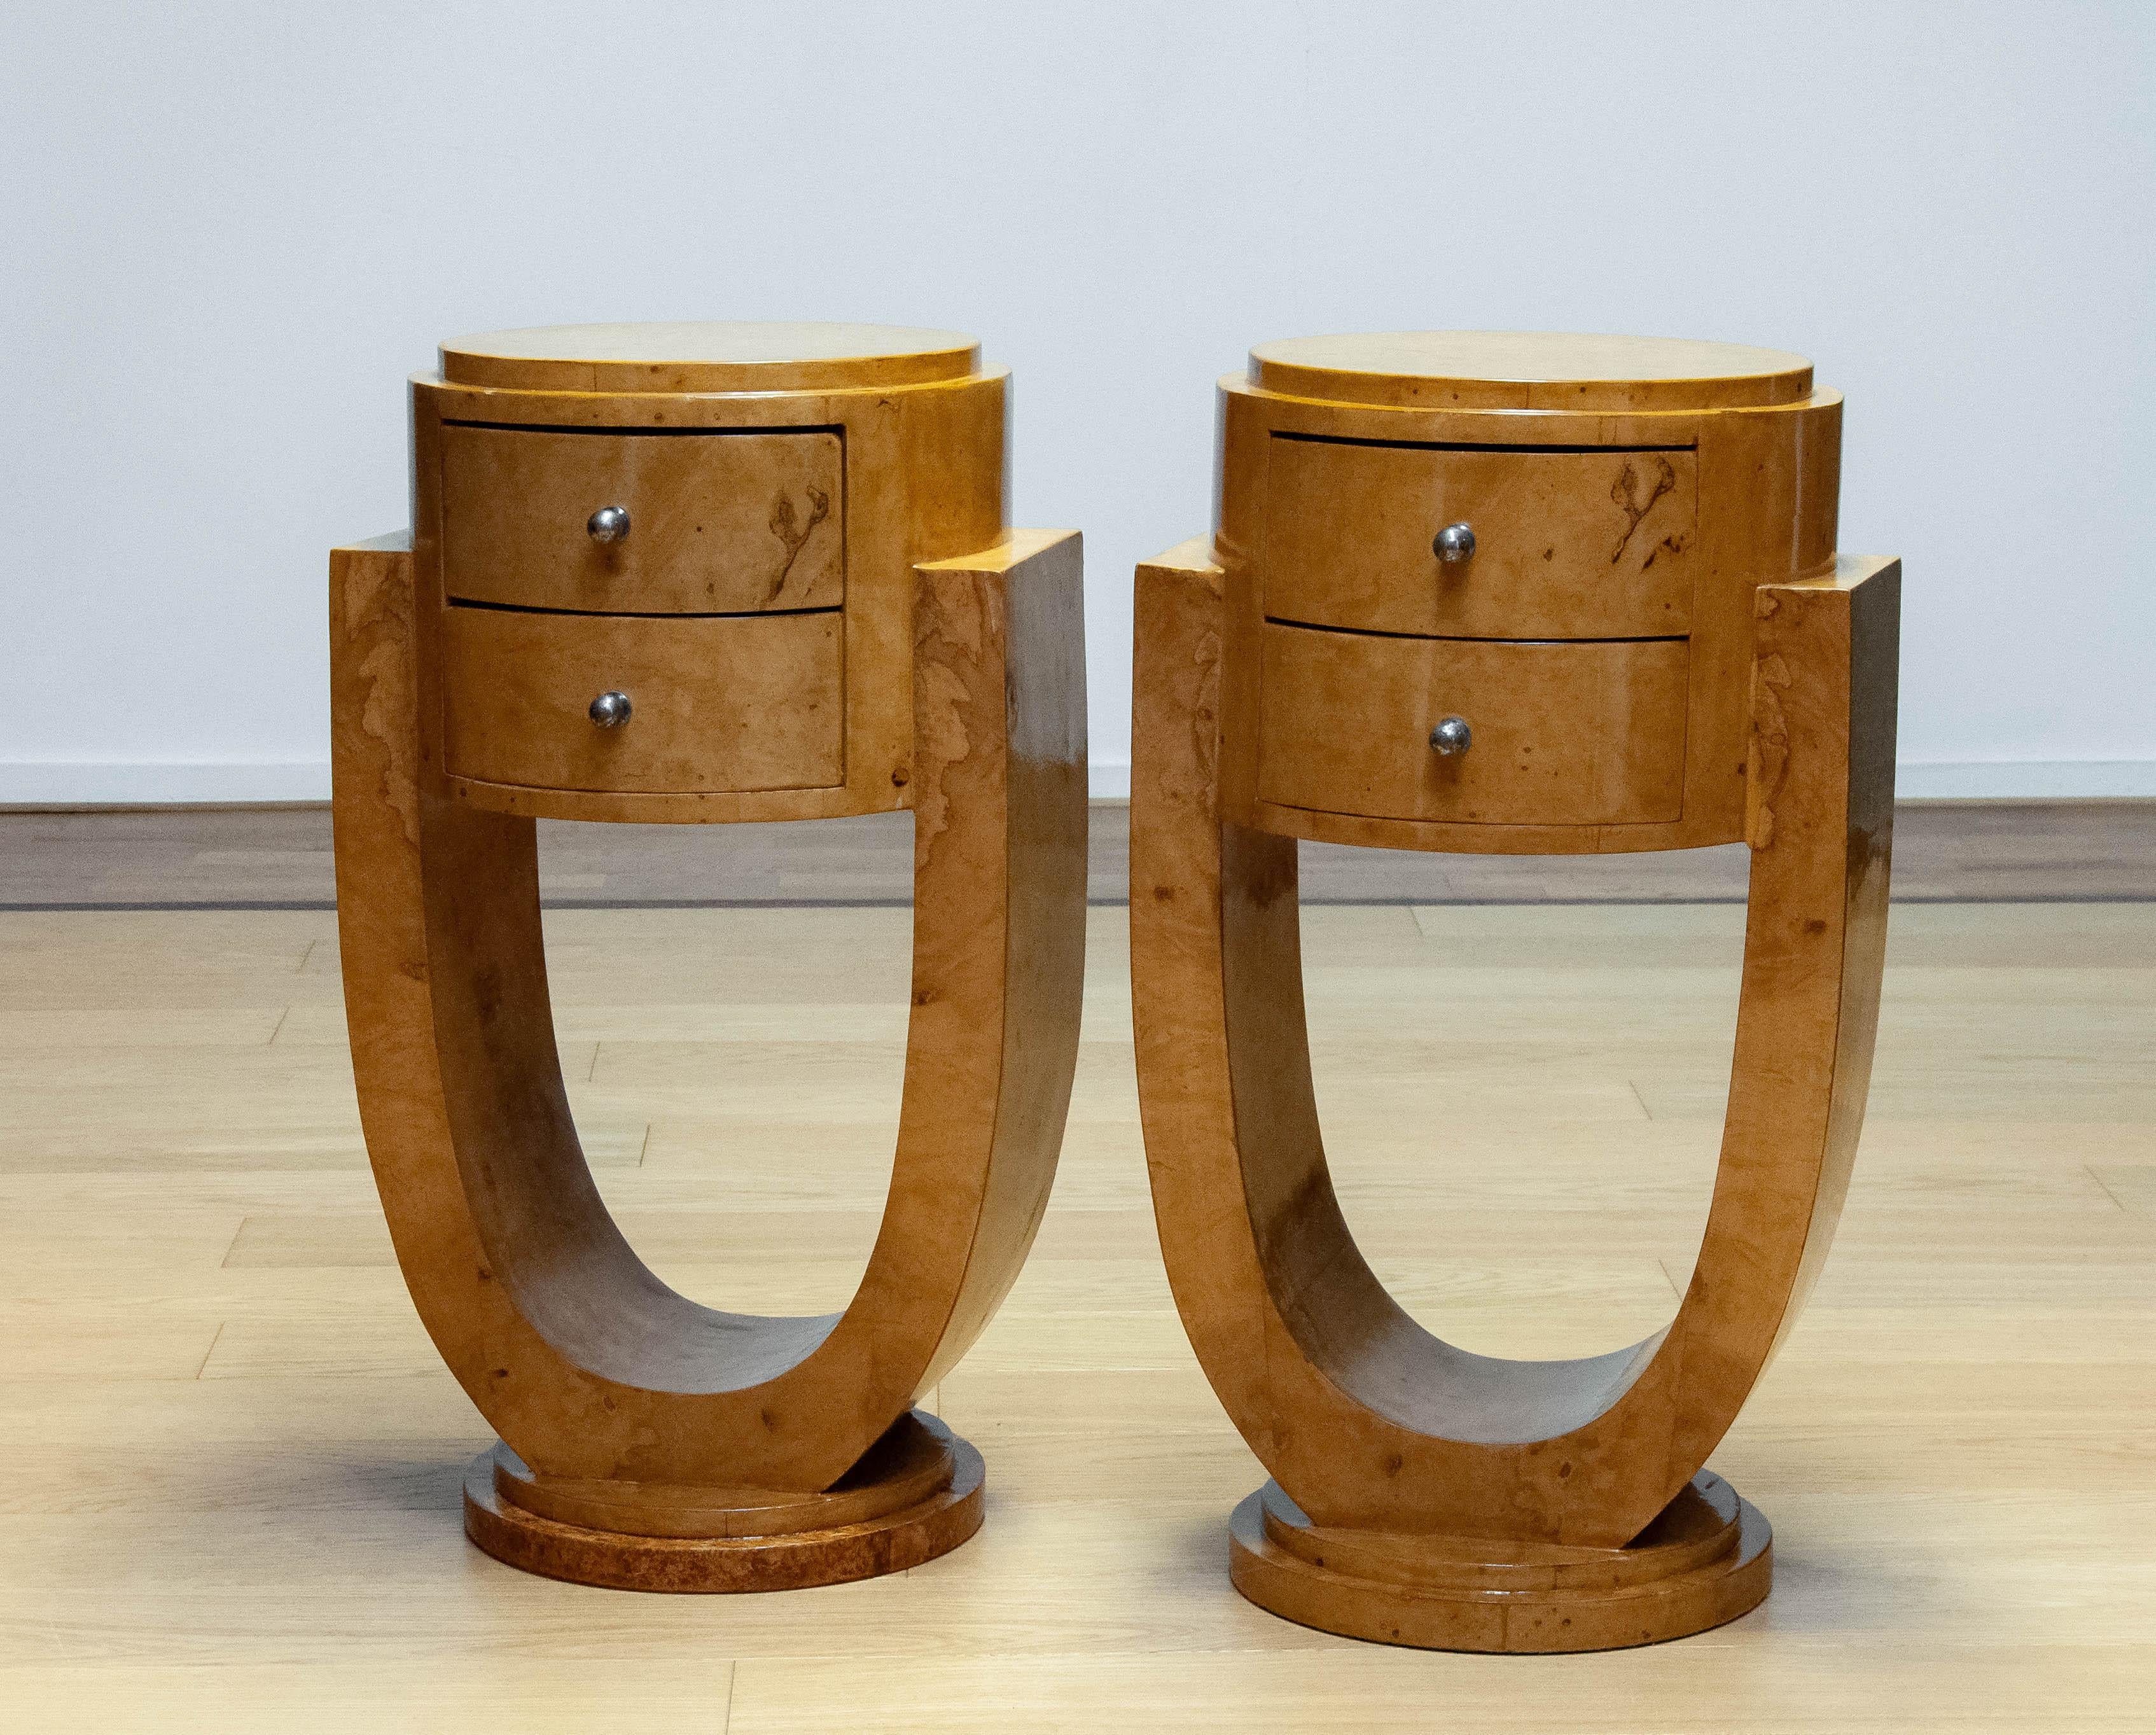 Beautiful and extremely decorative matching pair bedside tables / night stands in Art Deco style hand made in the 1990s in Asia for the European market.
Both bedside tables are veneered with poplar burl having a fantastic grain and color.
Finished